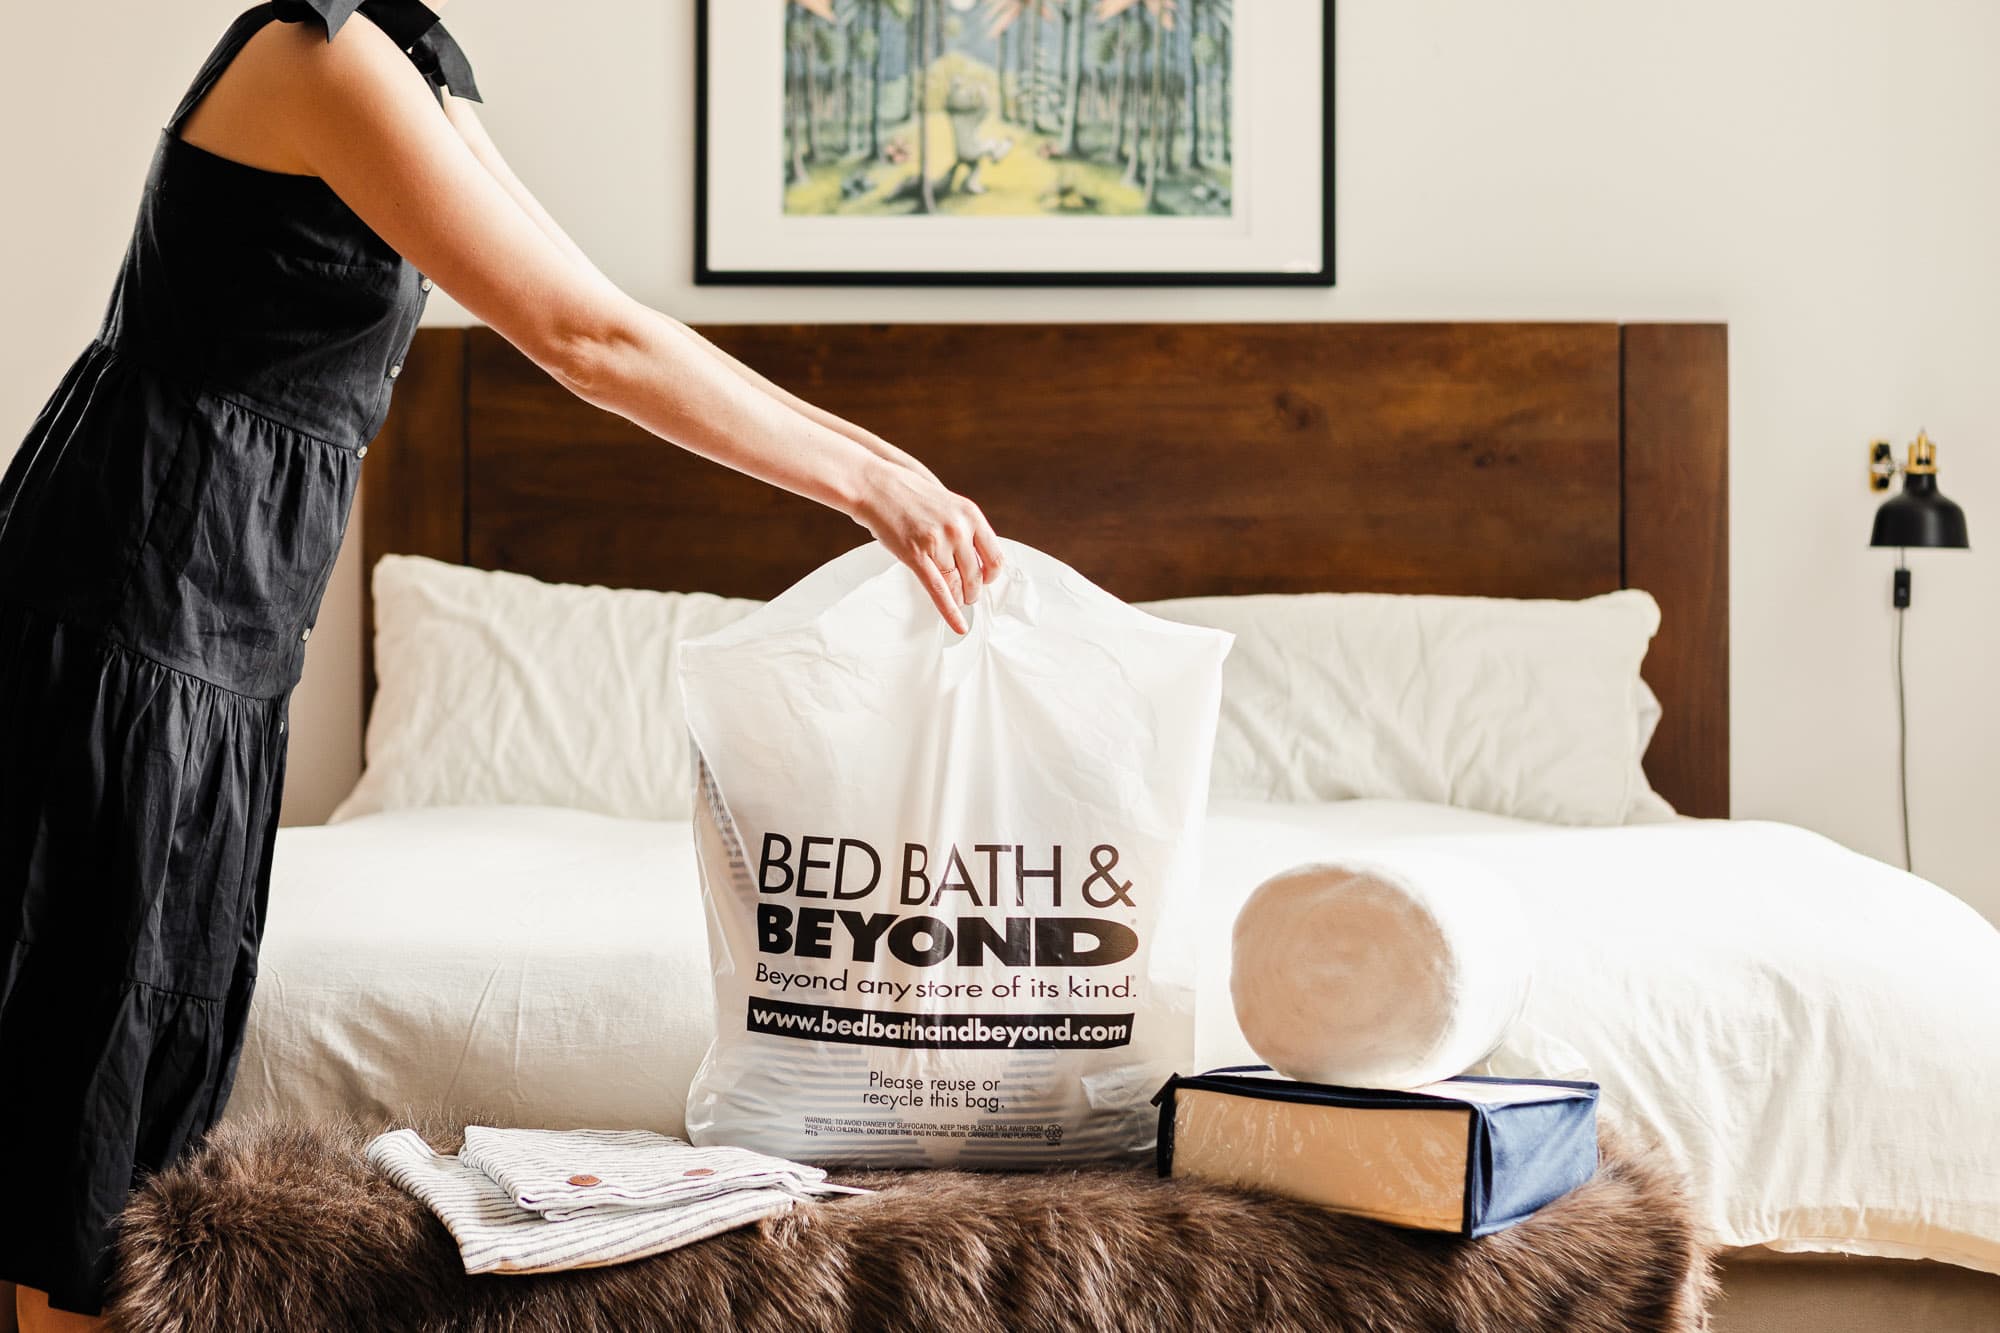 Hosting Essentials From Our Table at Bed Bath & Beyond